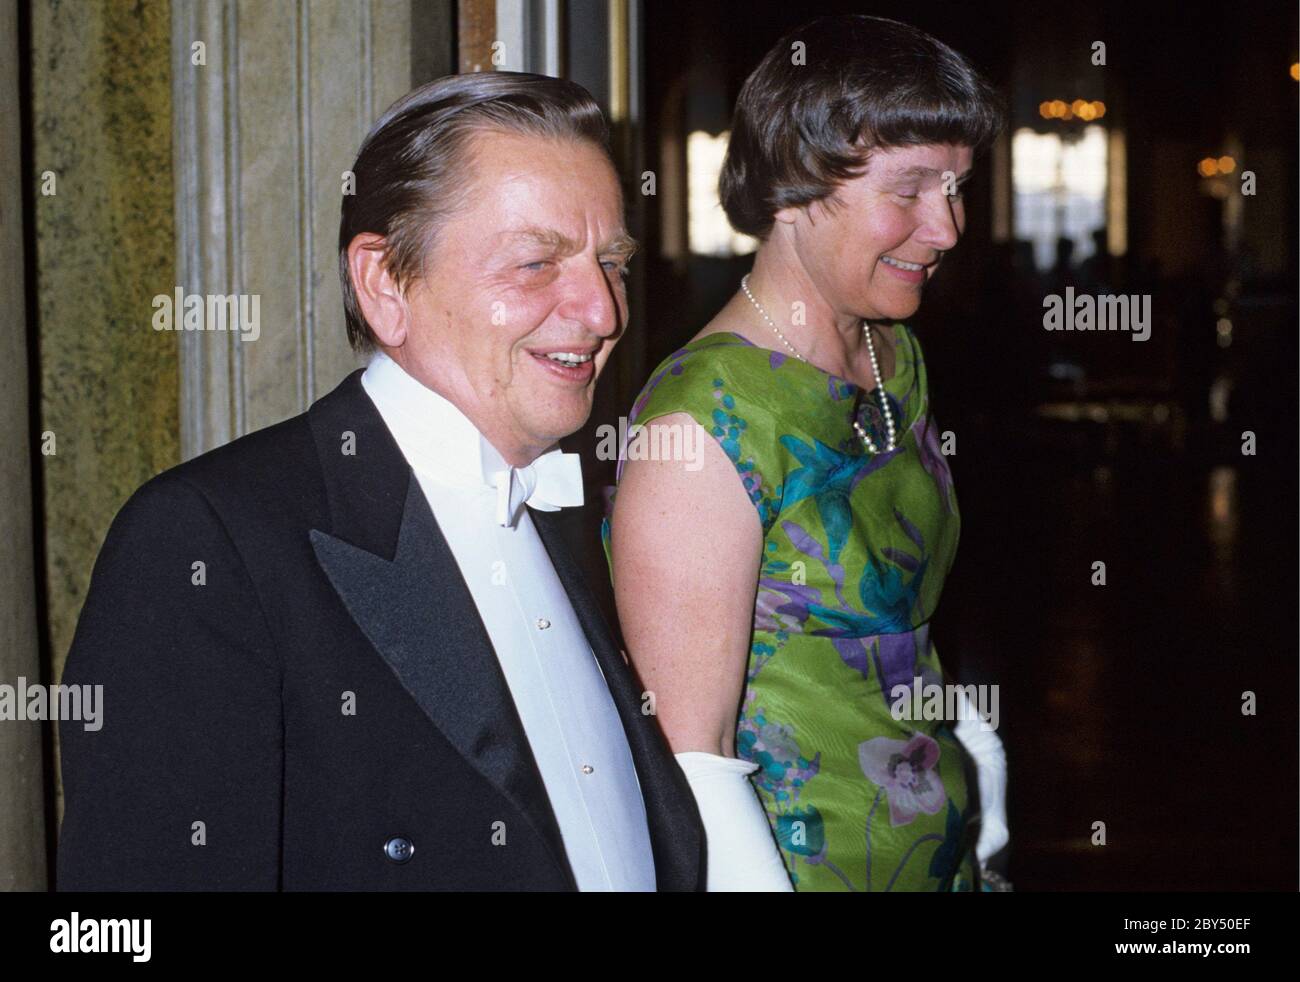 Olof Palme. Swedish social democratic politican and prime minister. Born october 14 1927. Murdered february 28 1985. Pictured here with his wife Lisbet Palme 1984  at a dinner at the royal castle in Stockholm. Stock Photo